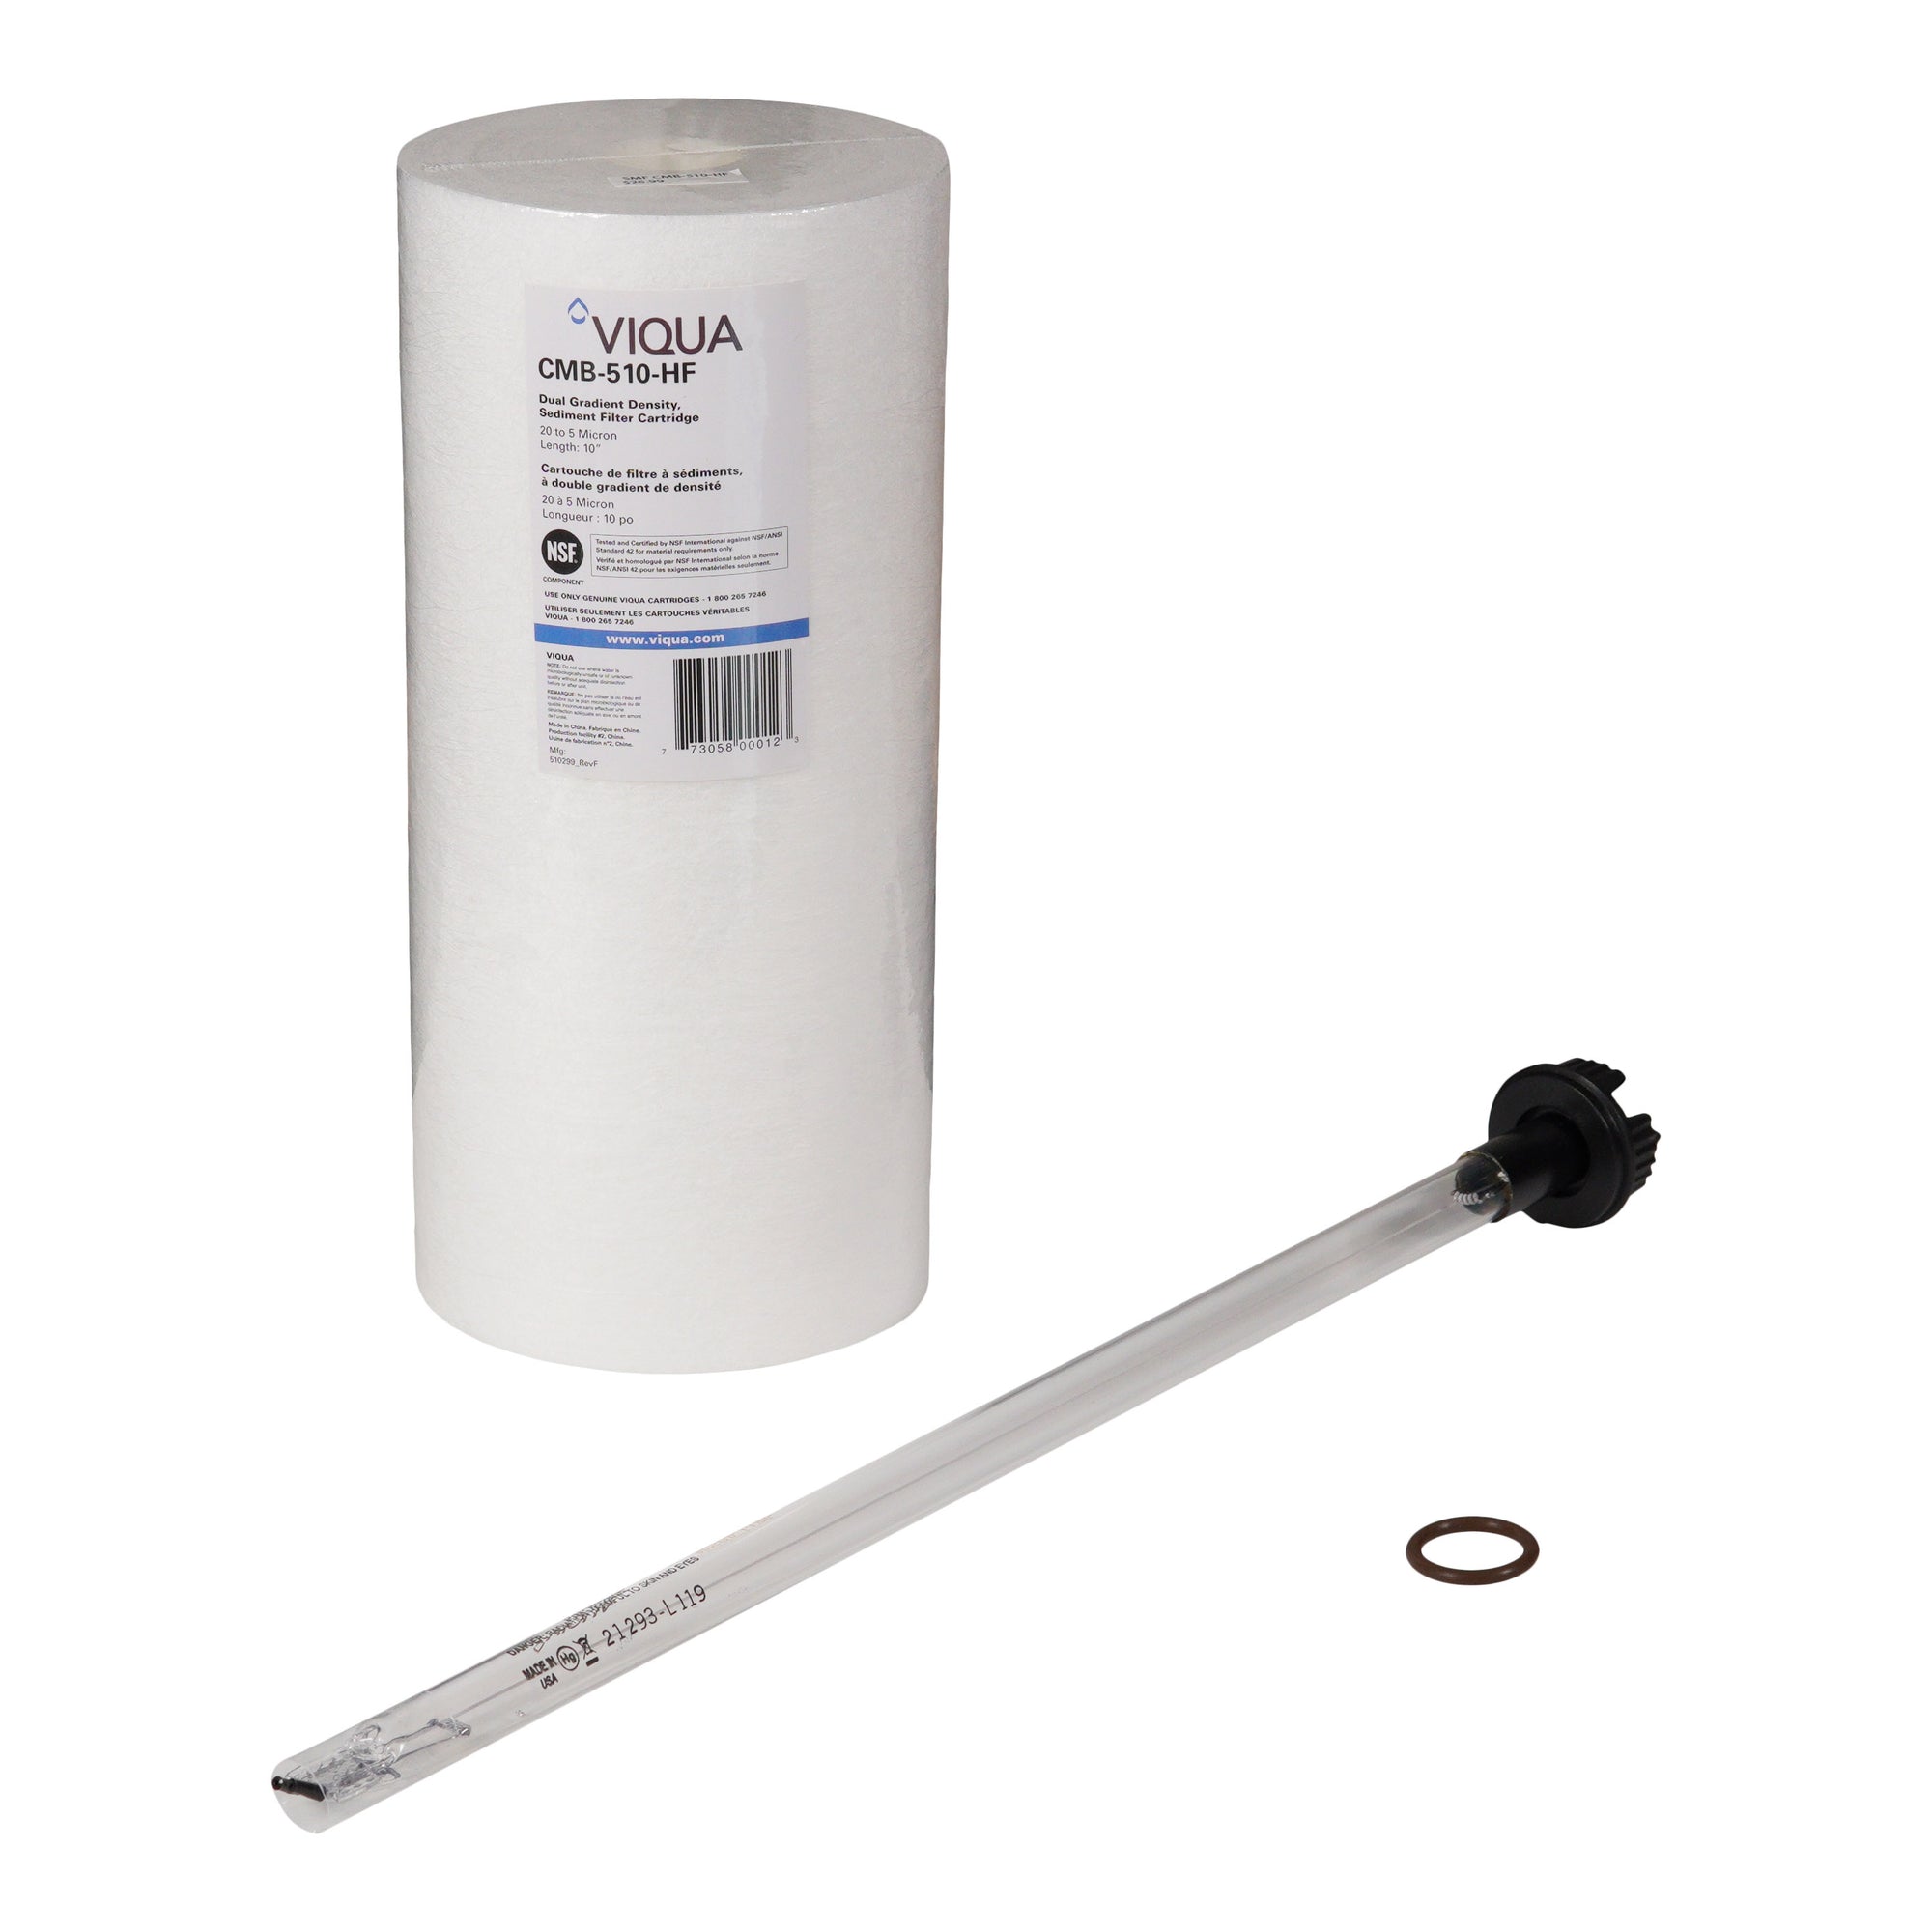 Viqua IHS10-D4 Genuine Replacement UV Lamp and Filter